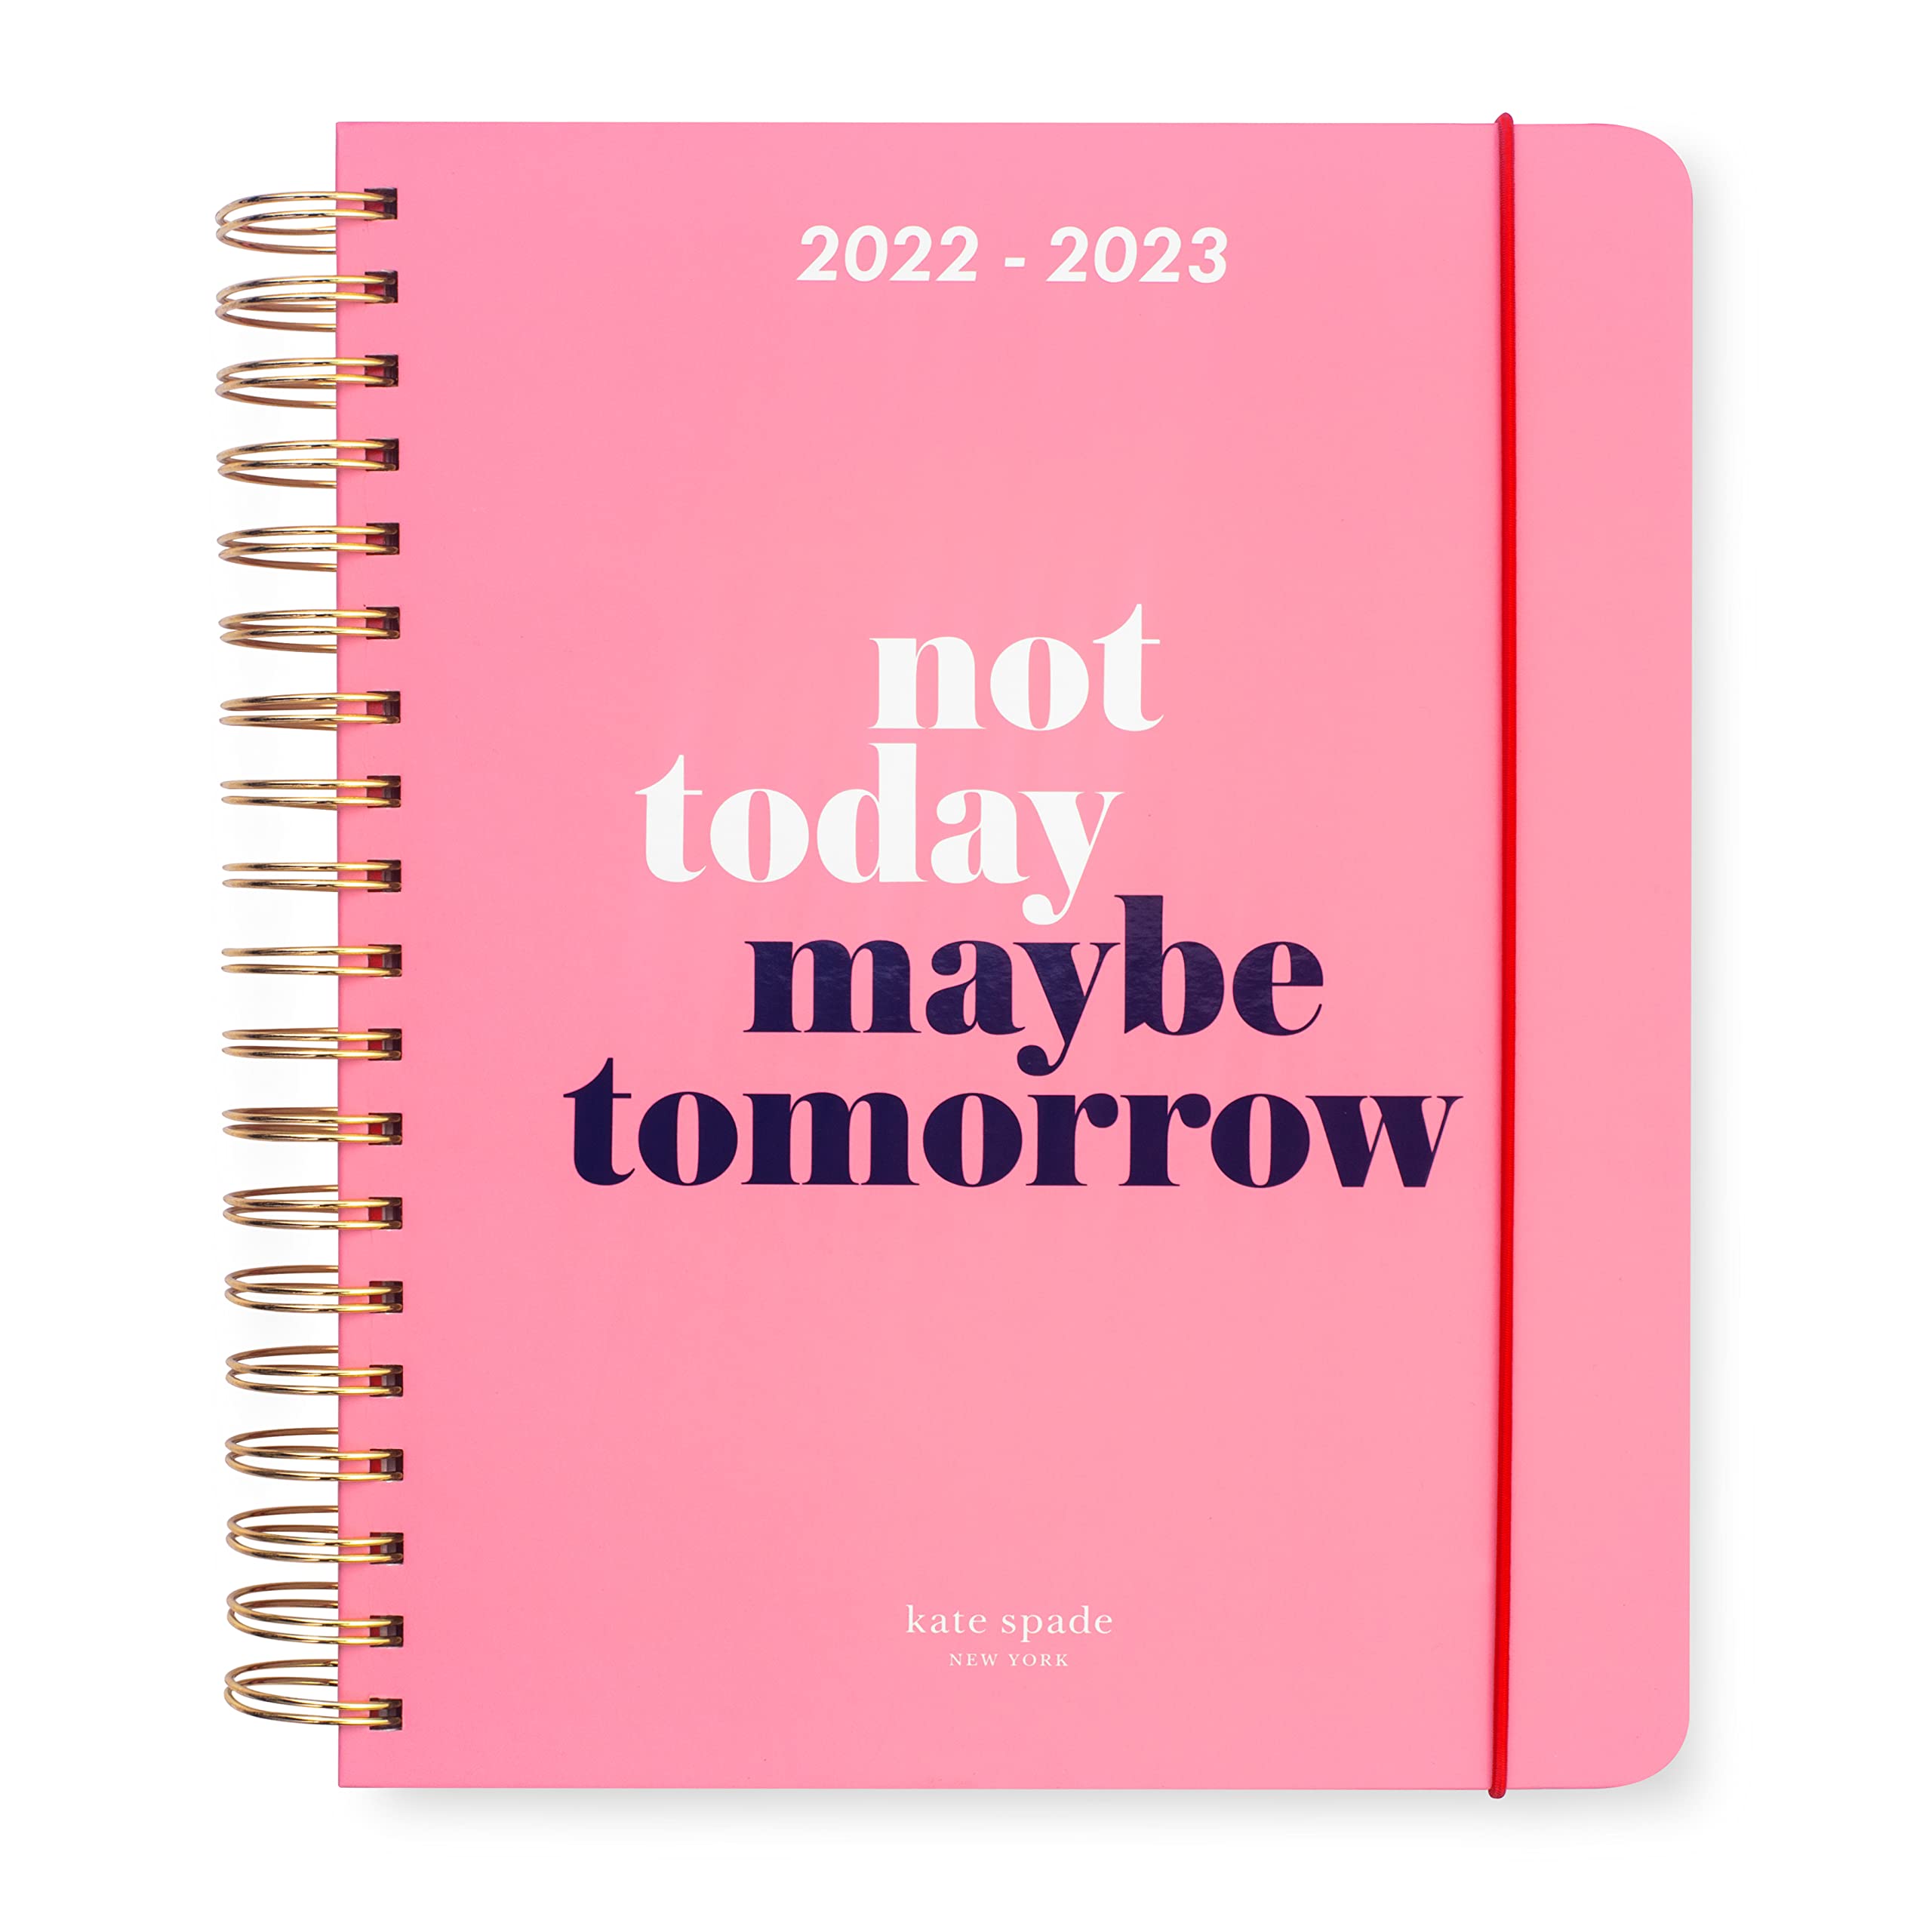 Mua Kate Spade New York 2022-2023 Planner Weekly and Monthly, Mega Planner  Dated August 2022 - December 2023, Pink Hardcover Agenda, Day Planner with  Stickers, Pockets, and Spiral Binding, Colorblock trên Amazon